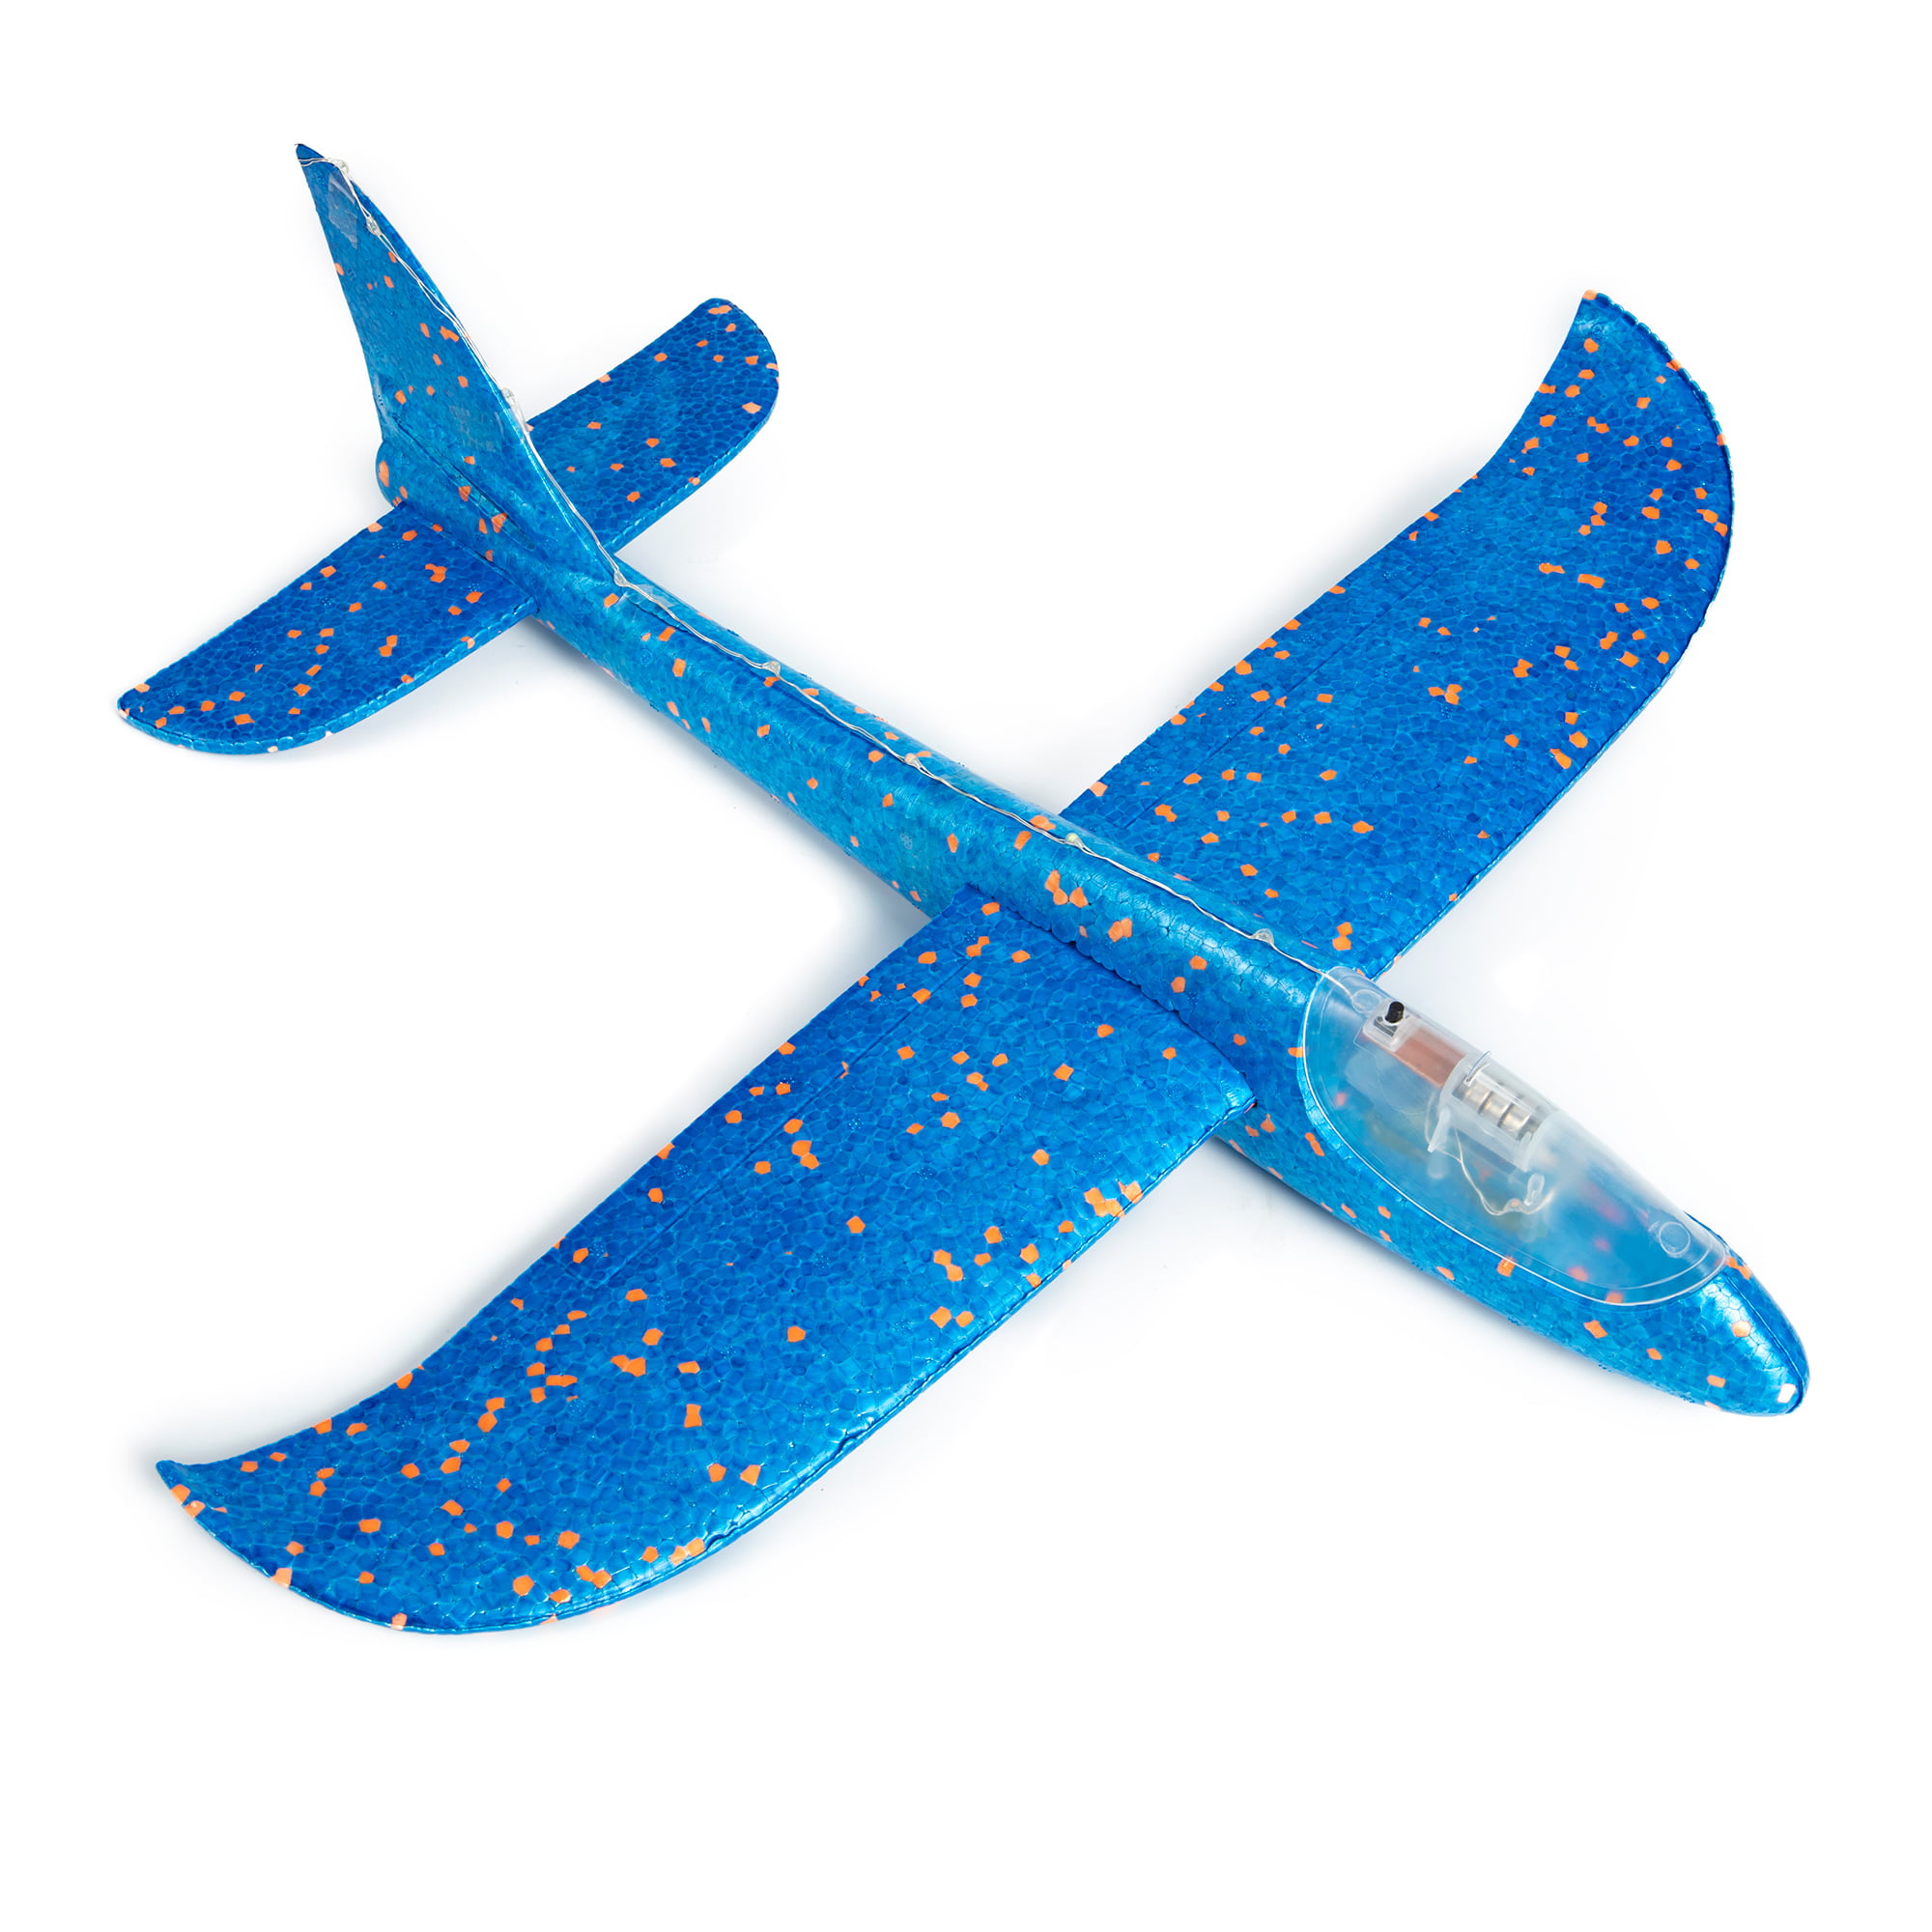 Airplane Toy Foam Airplanes for Kids Styrofoam Plane Glider Outdoor Toys Easy Throwing Air Planes STEM Summer Yard Beach Games Gifts for Age 4 5 6 7 8 9 10 Blue